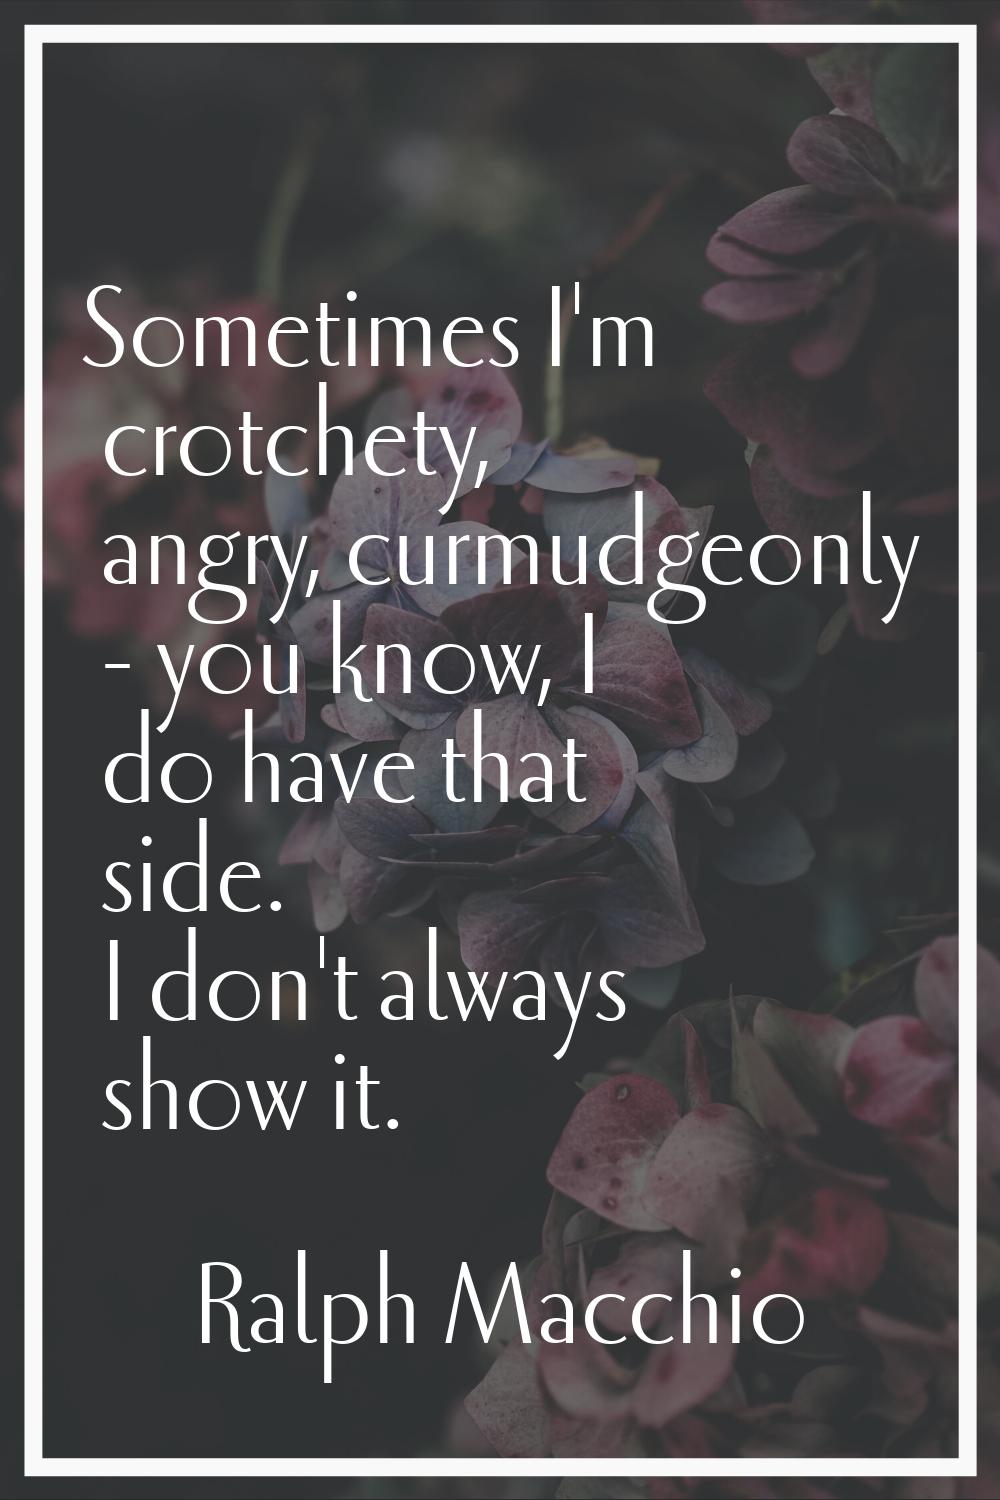 Sometimes I'm crotchety, angry, curmudgeonly - you know, I do have that side. I don't always show i